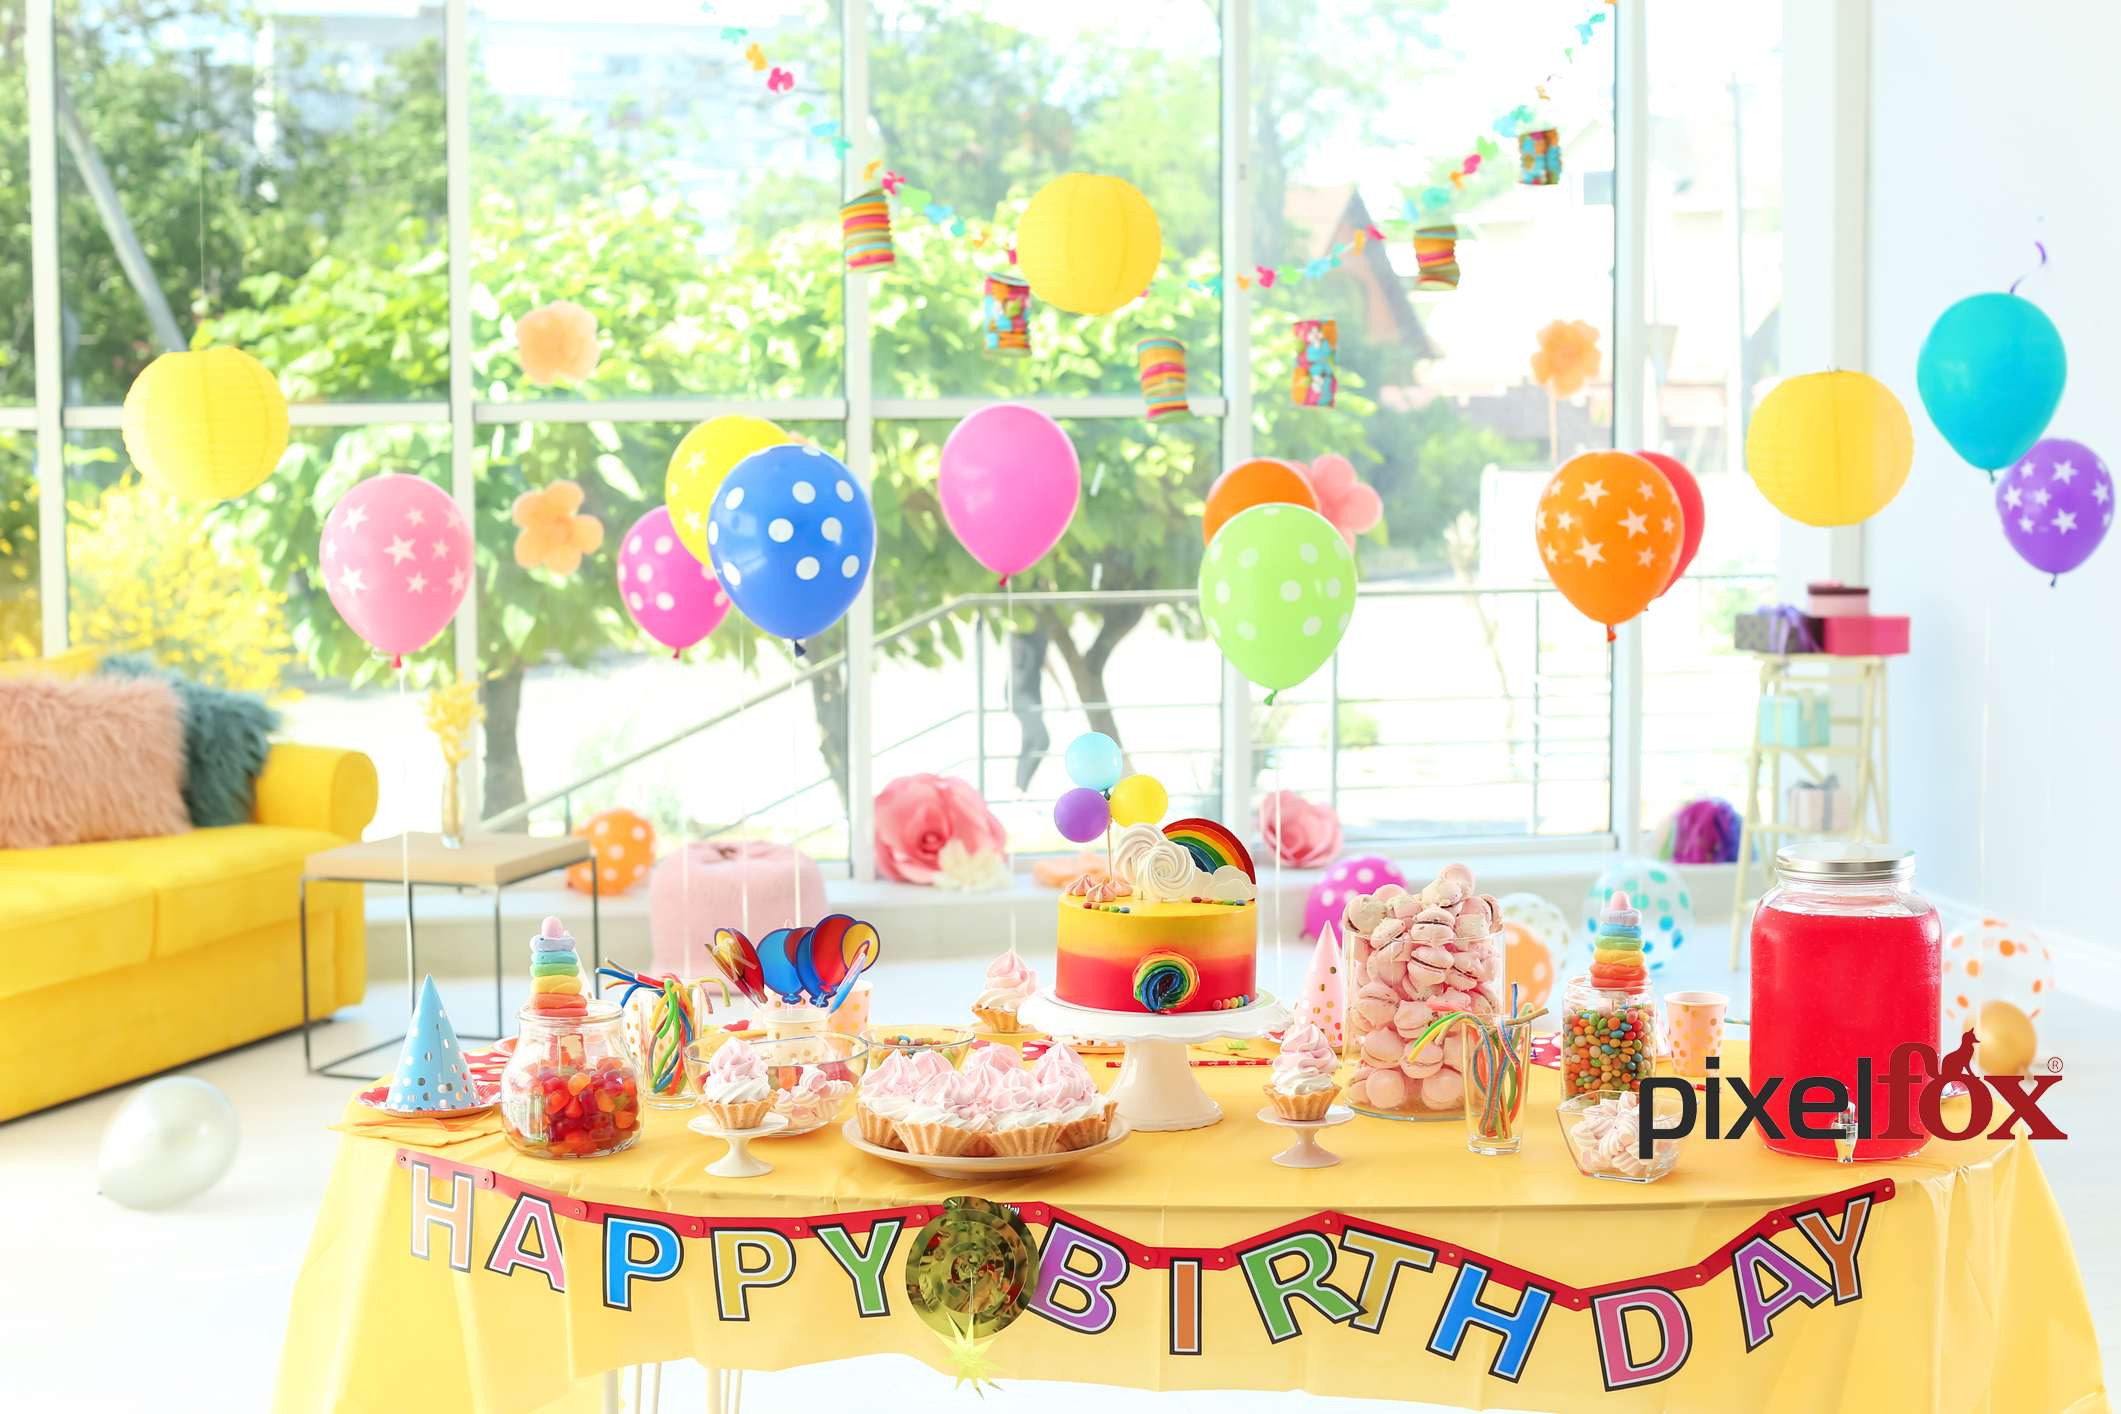 How Birthday balloons for decoration kit can help you arrange birthday parties at home